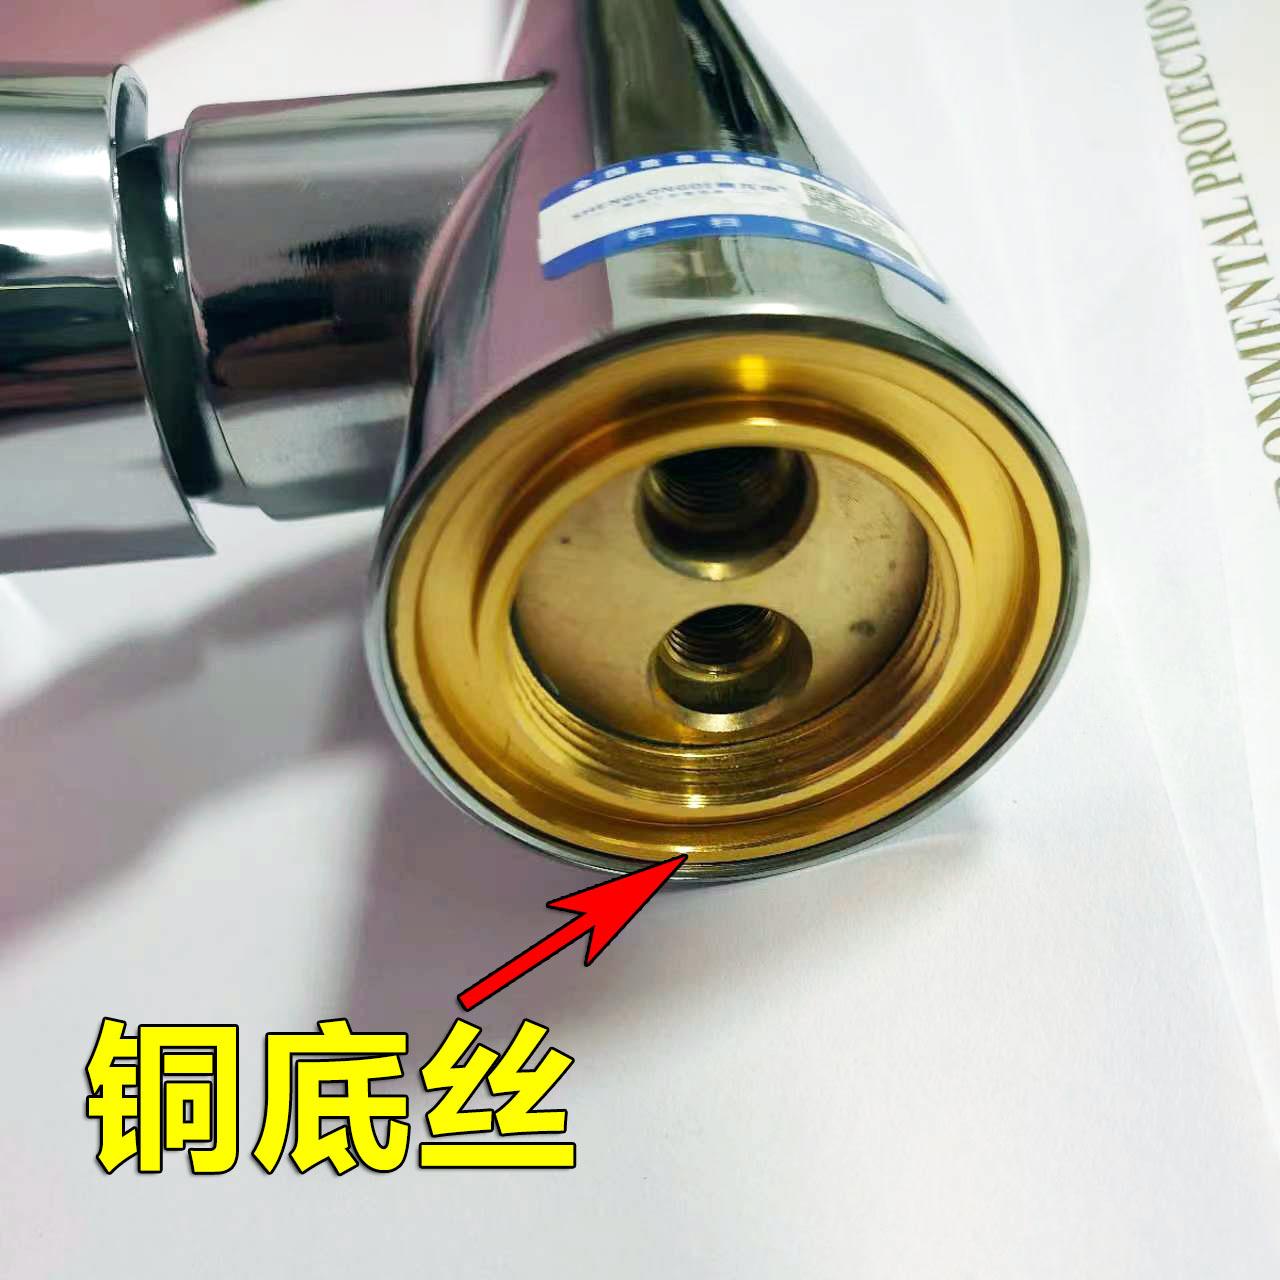 Stainless Steel Alloy Kitchen Sink Hot and Cold Mixing Faucet Kitchen Mixing Faucet Goddess High Bend Gaobo Hot and Cold Mixing